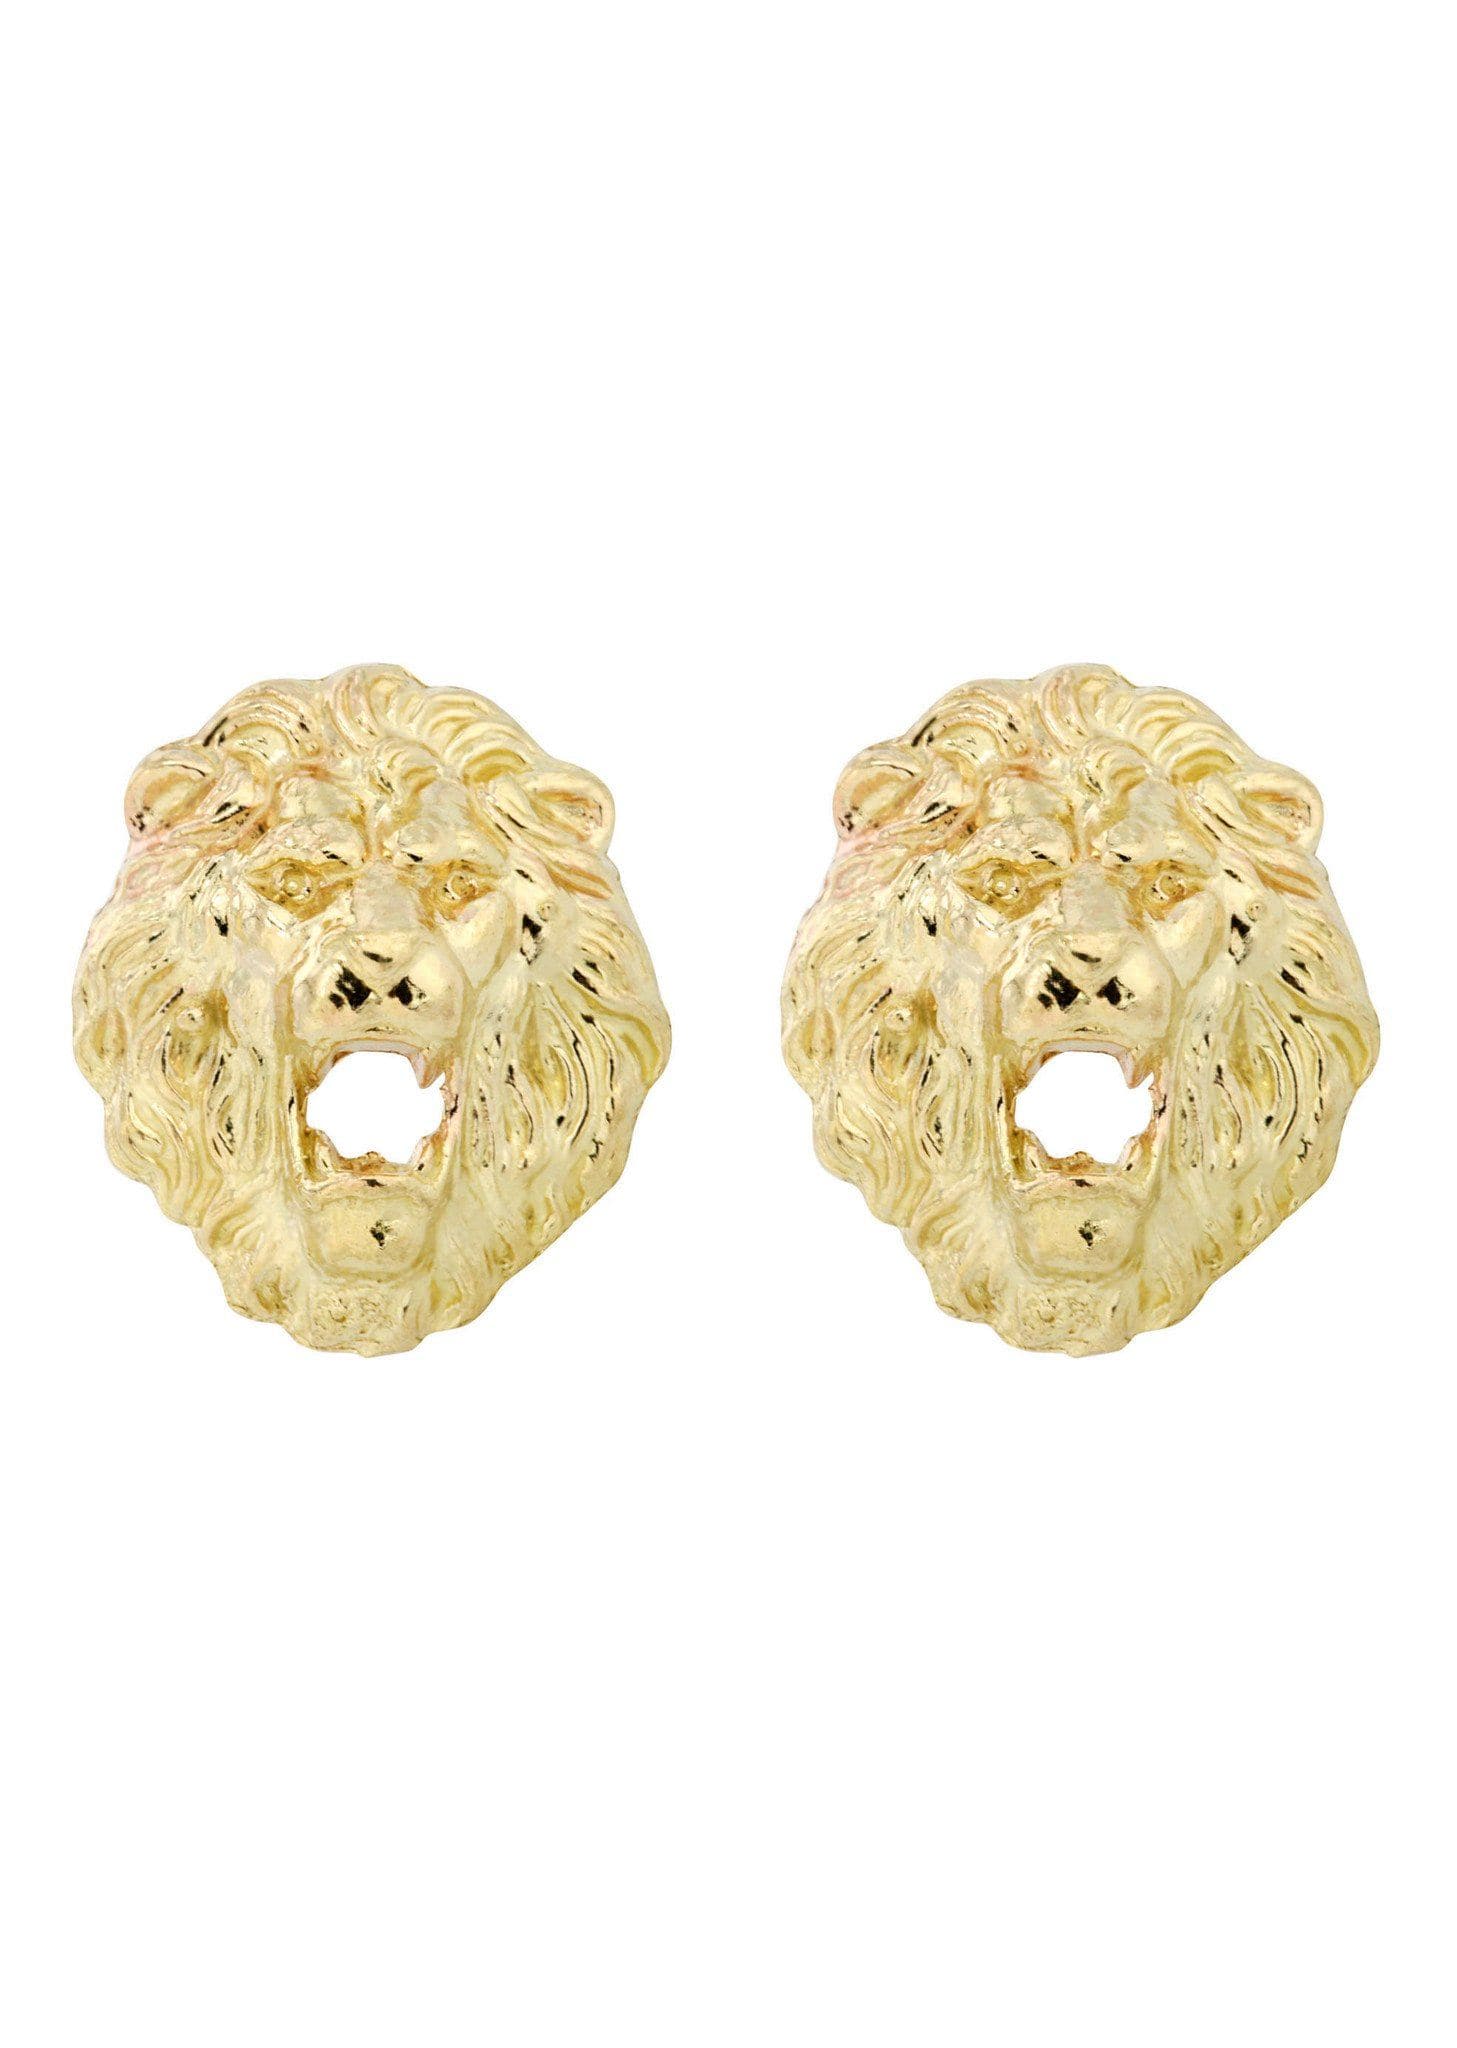 Lion Head Gold Earrings For Men | Appx 1/2 Inches Wide – FrostNYC